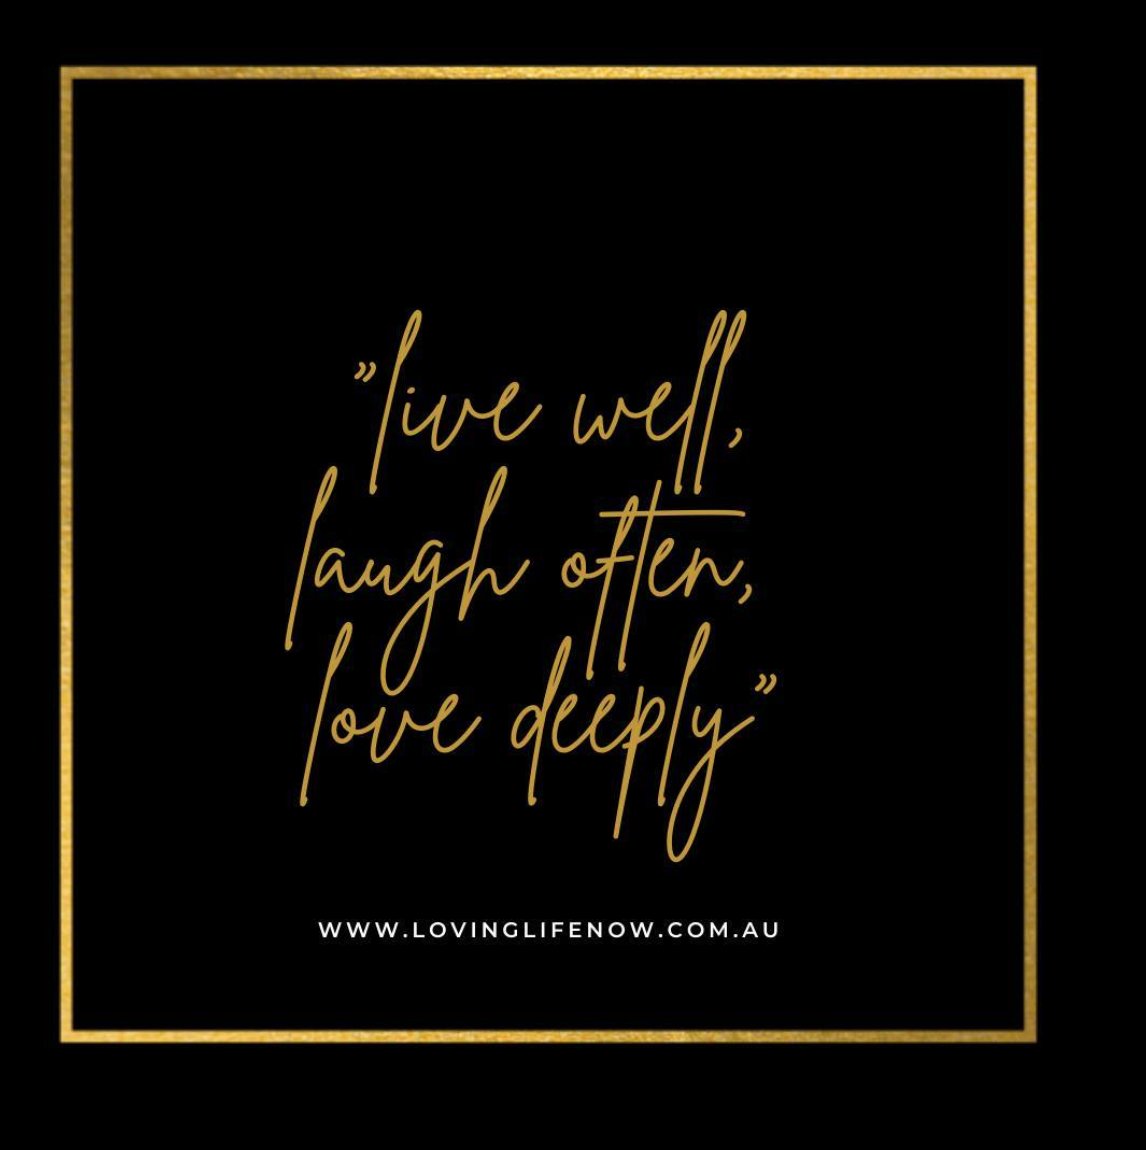 Live well, laugh often, love deeply
-
-
#LivingLovingLife
#OnlineIncomeOpportunity #WorkFromAnywhere #OnlineBusinessSolution
#SimonAndLeeAnne #LifestyleLoveAndBeyond
#LaptopLifestyle #PortableOnlineBusiness
#SimonHaggard #LeeAnneHaggard #LovingLifeNow